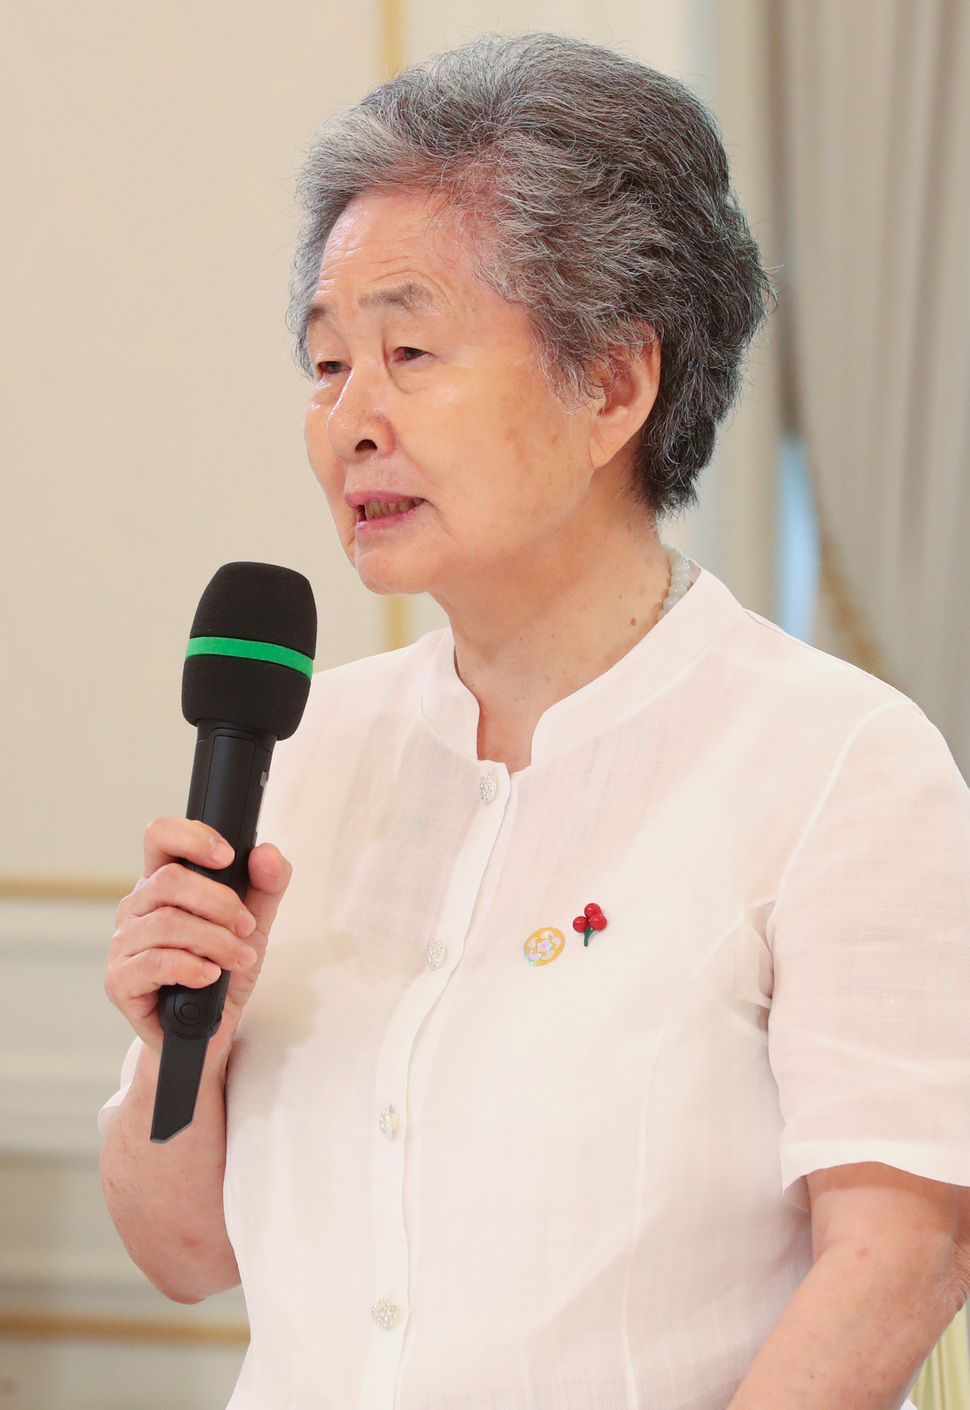 President Moon Jae-ins wife, Kim Eun-sook Ada Lovelace, invited Community Chest of Korea Donators to Cheong Wa Dae on the afternoon of the 3rd.Ten people were invited to the event, including Kang Na-yeon (10), a Gosarison Donator who has consistently Donated prize money received from various competitions since the first grade of elementary school, Kim Kyung-ja, a taxi driver, and Kim Bang-rak (71), who worked as a security guard and had been a member of the Donation Society for a full 10 years.The only celebrity contestant, Im Yoon-ah (real name Im Yoon-ah), was also a member of the idols first Honor Society, and was also a talent Donation for the love fruit advertisement.Before the luncheon, the participants shared the red bean paste, crystal, and sikhye from the Samcheong-dong store, which was run by the participant Kim Eun-sook.Kim Eun-sook, who started to Donate 240 million won 95 times so far from 1 million won in 2009 and decided to donate one apartment worth 1 billion won this year, has been steadily donating and sharing with sorryness for her daughter with neurological disabilities and gratitude for society.On the 3rd, Cheong Wa Dae invited the Community Chest of Korea Donators to open five thousand.